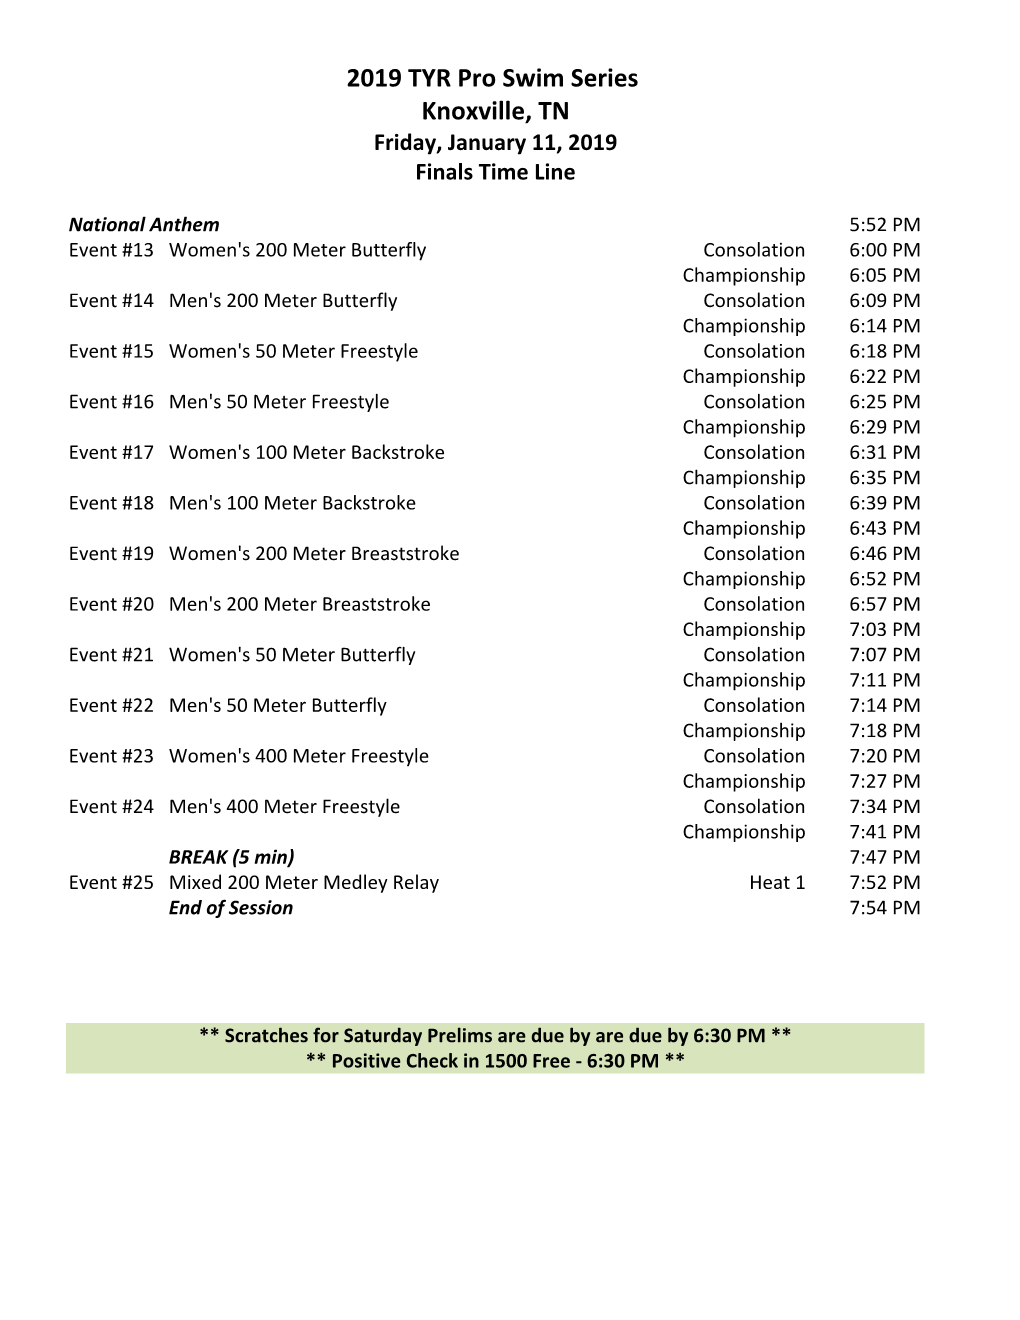 2019 TYR Pro Swim Series Knoxville, TN Friday, January 11, 2019 Finals Time Line